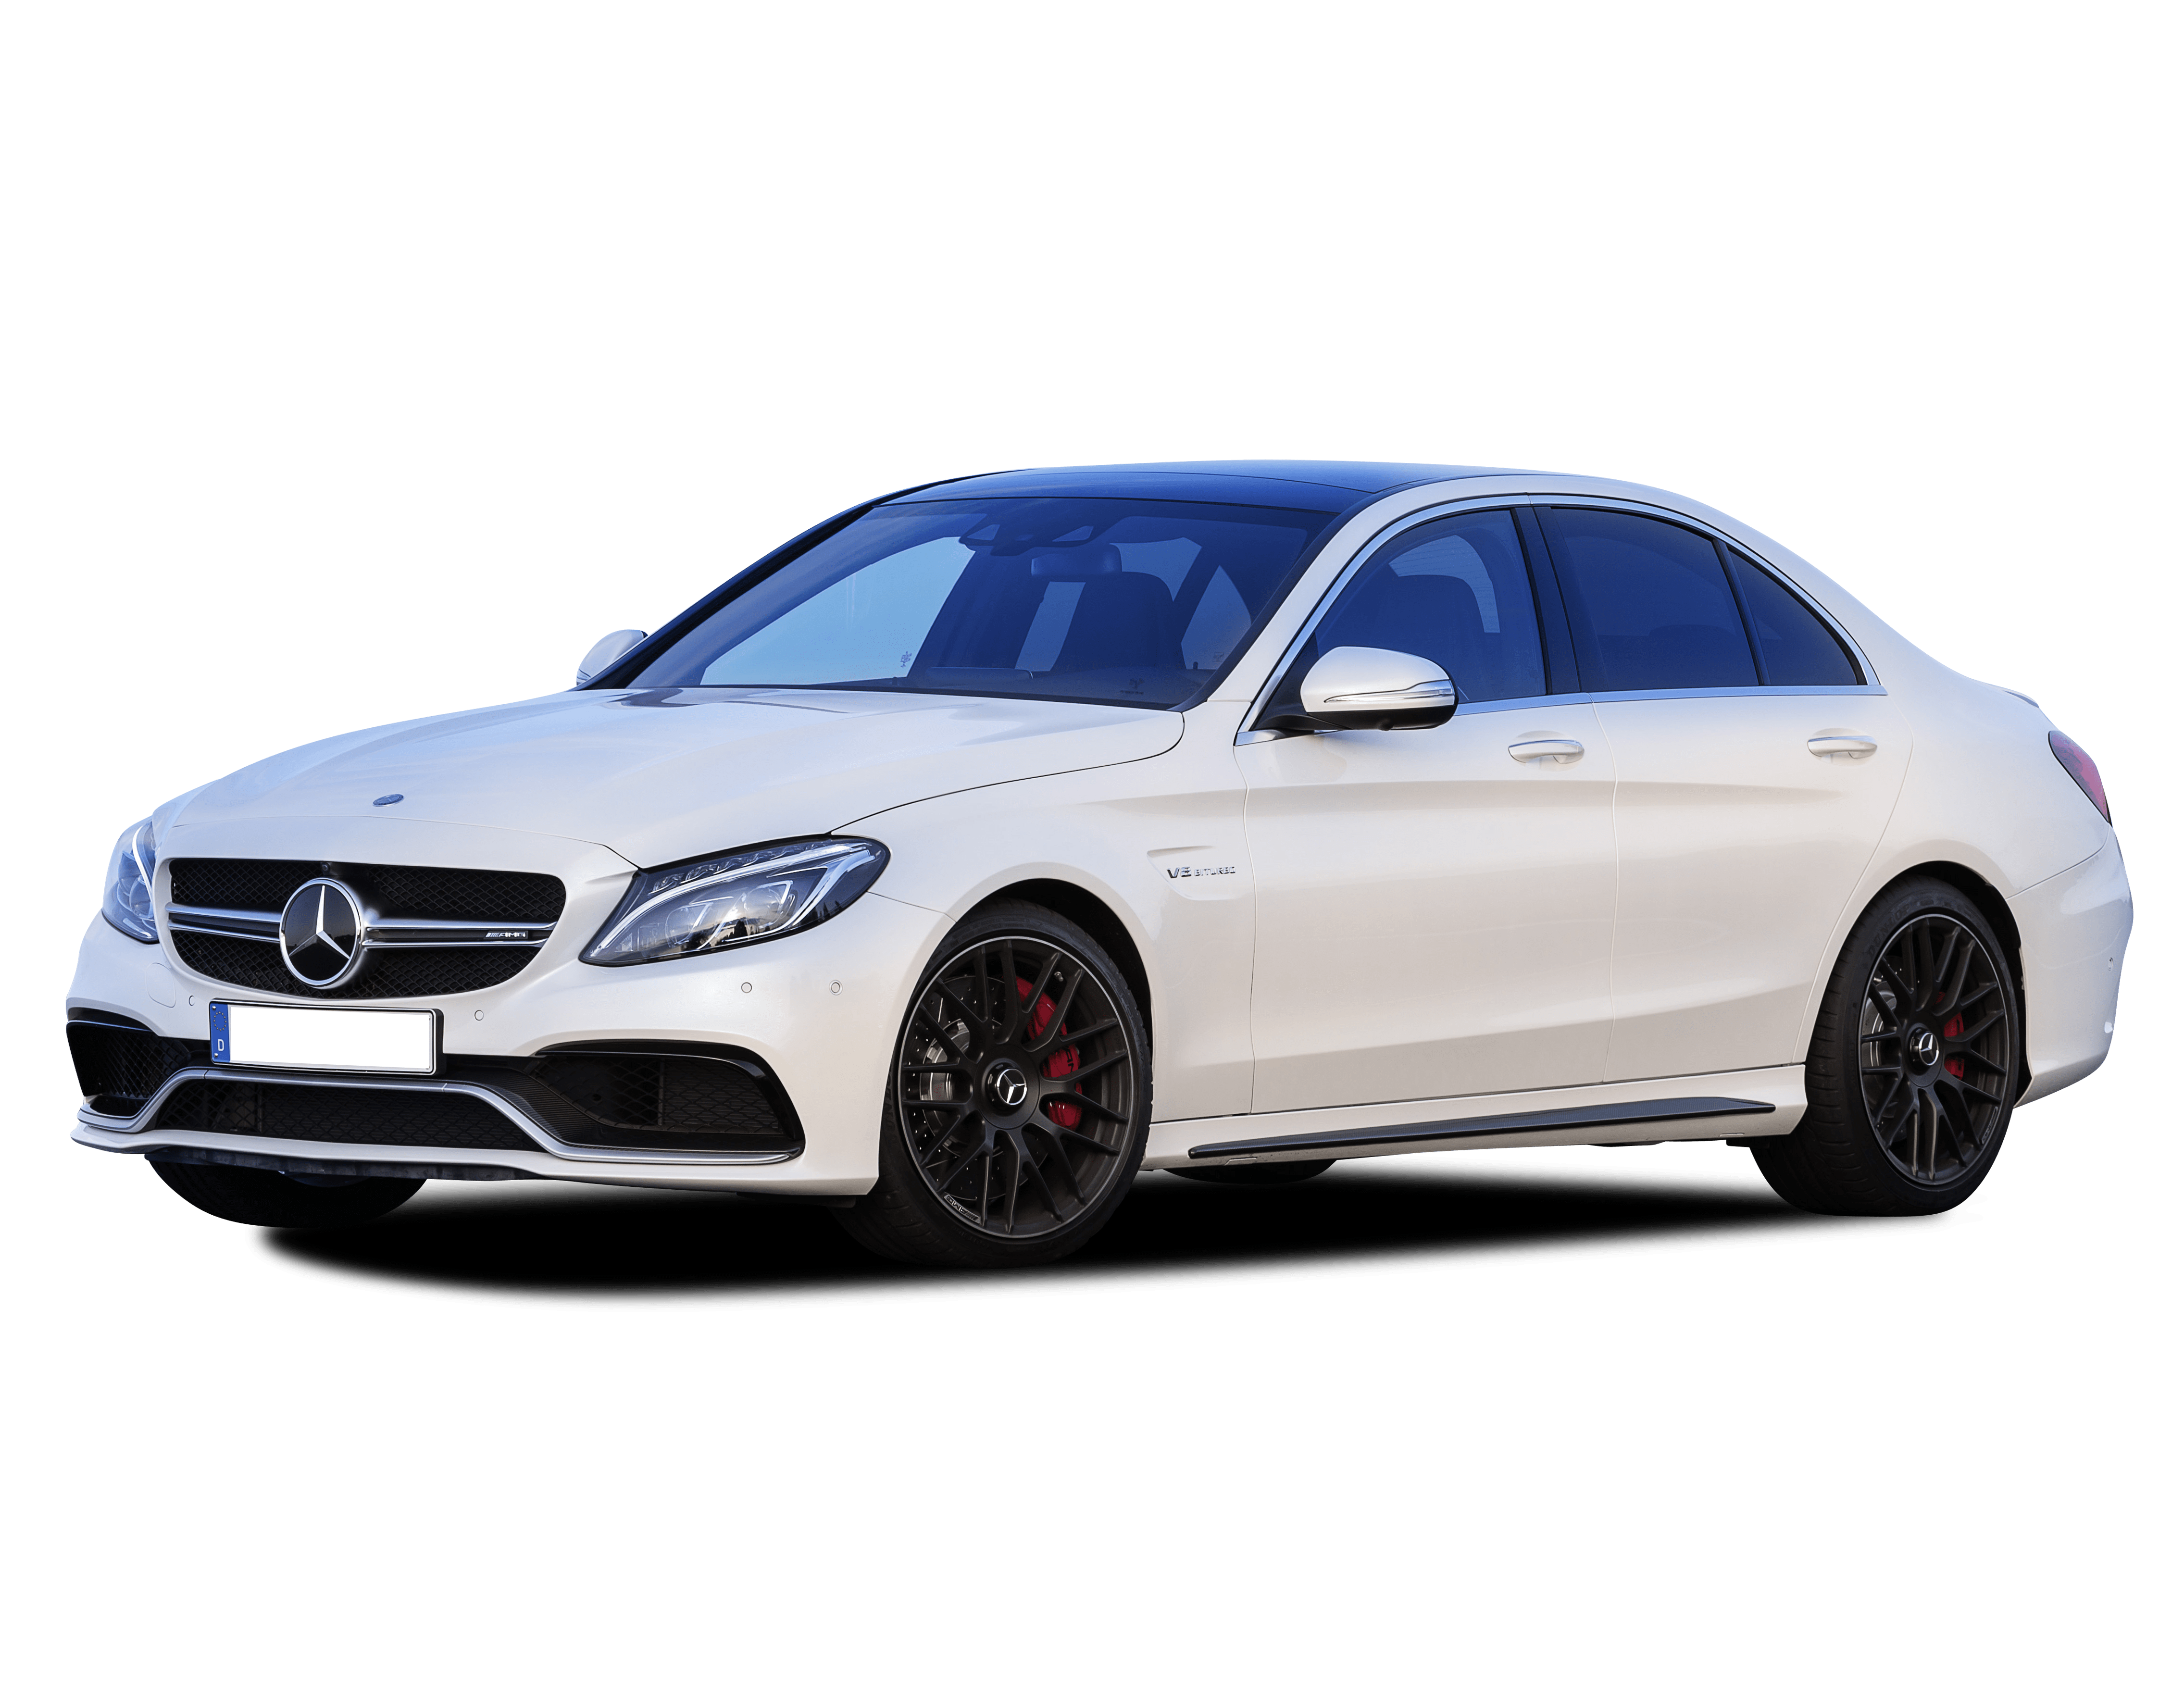 Mercedes Amg C63 Problems Reliability Issues Carsguide